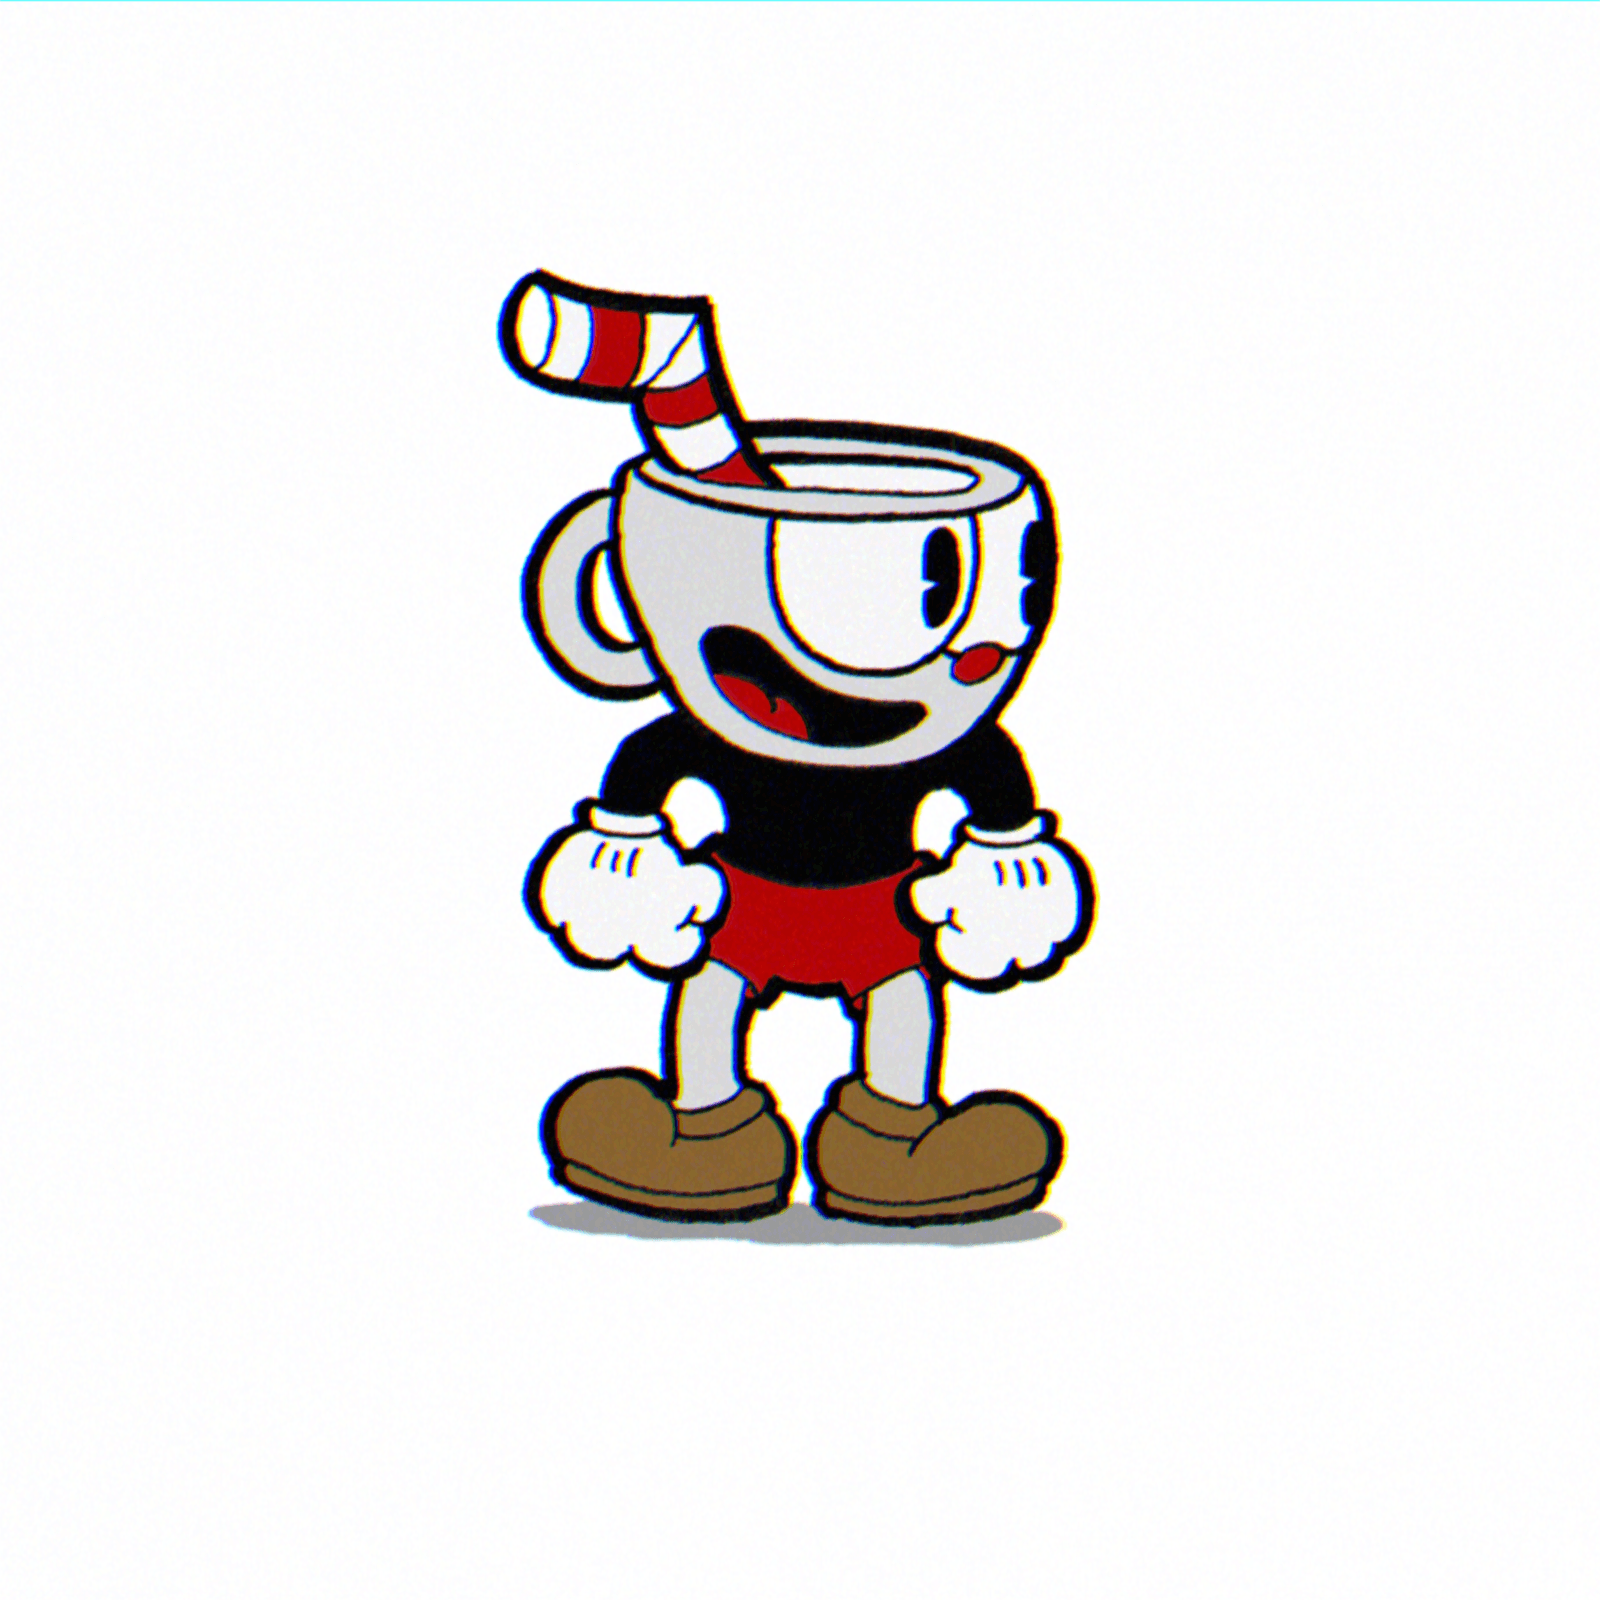 Cuphead screenshots, image and pictures.